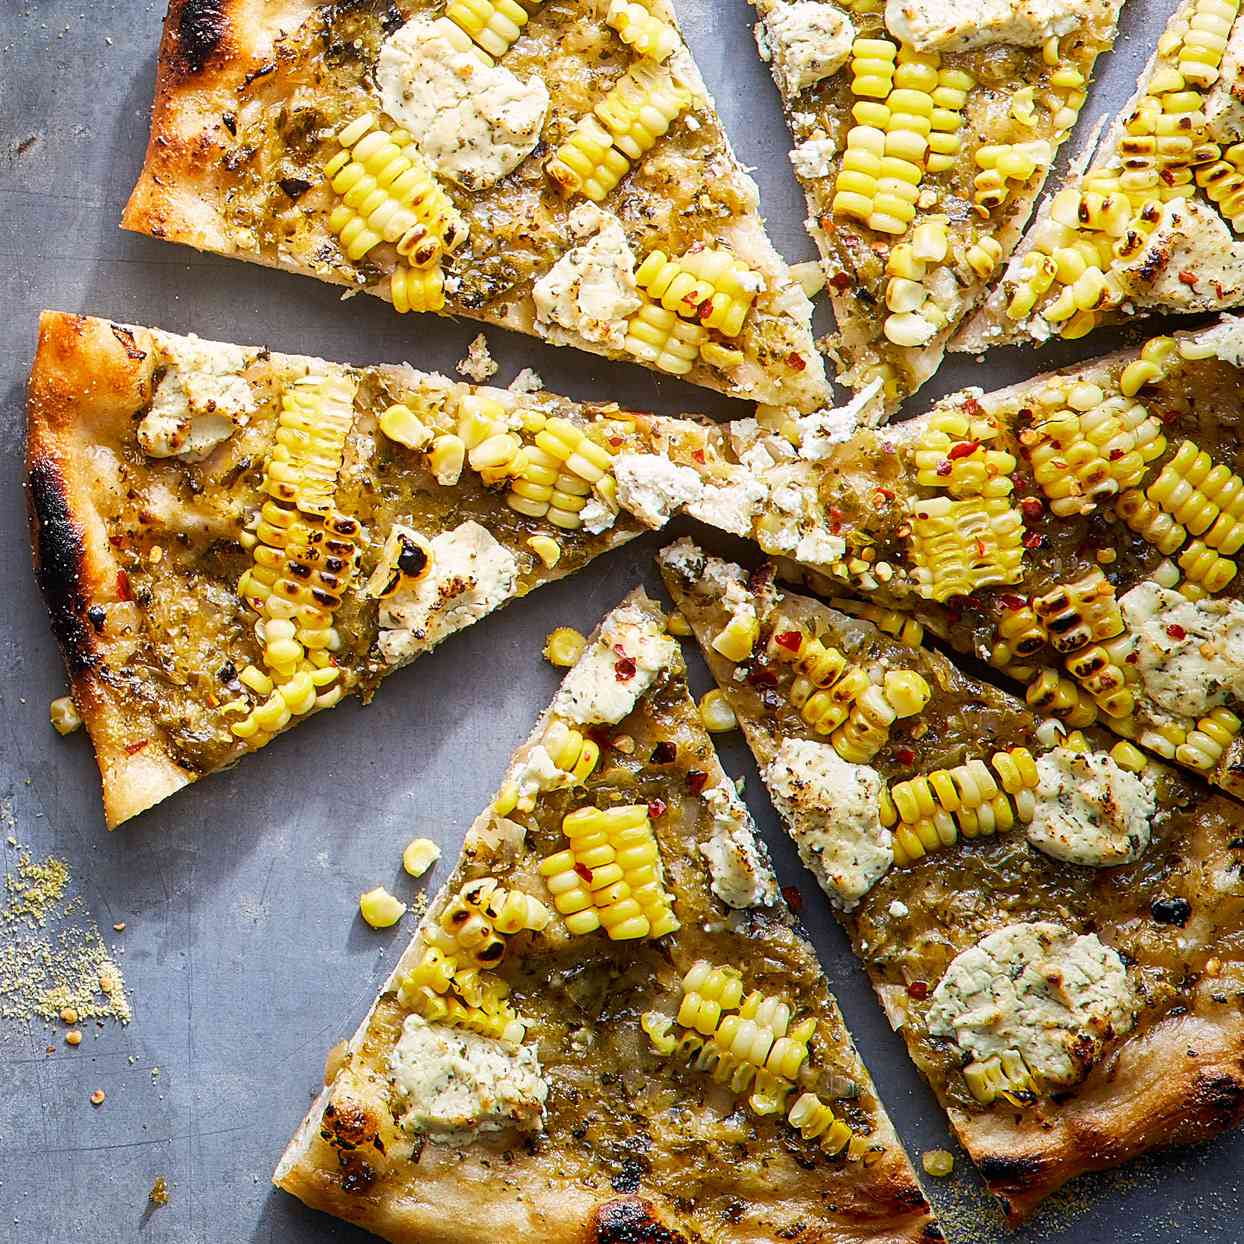 <p>When life leaves you one lonely ear of sweet corn, make this pizza, topped with green salsa, corn and goat cheese. It's a favorite at Millsap Farm's Pizza Club parties.</p>
                          